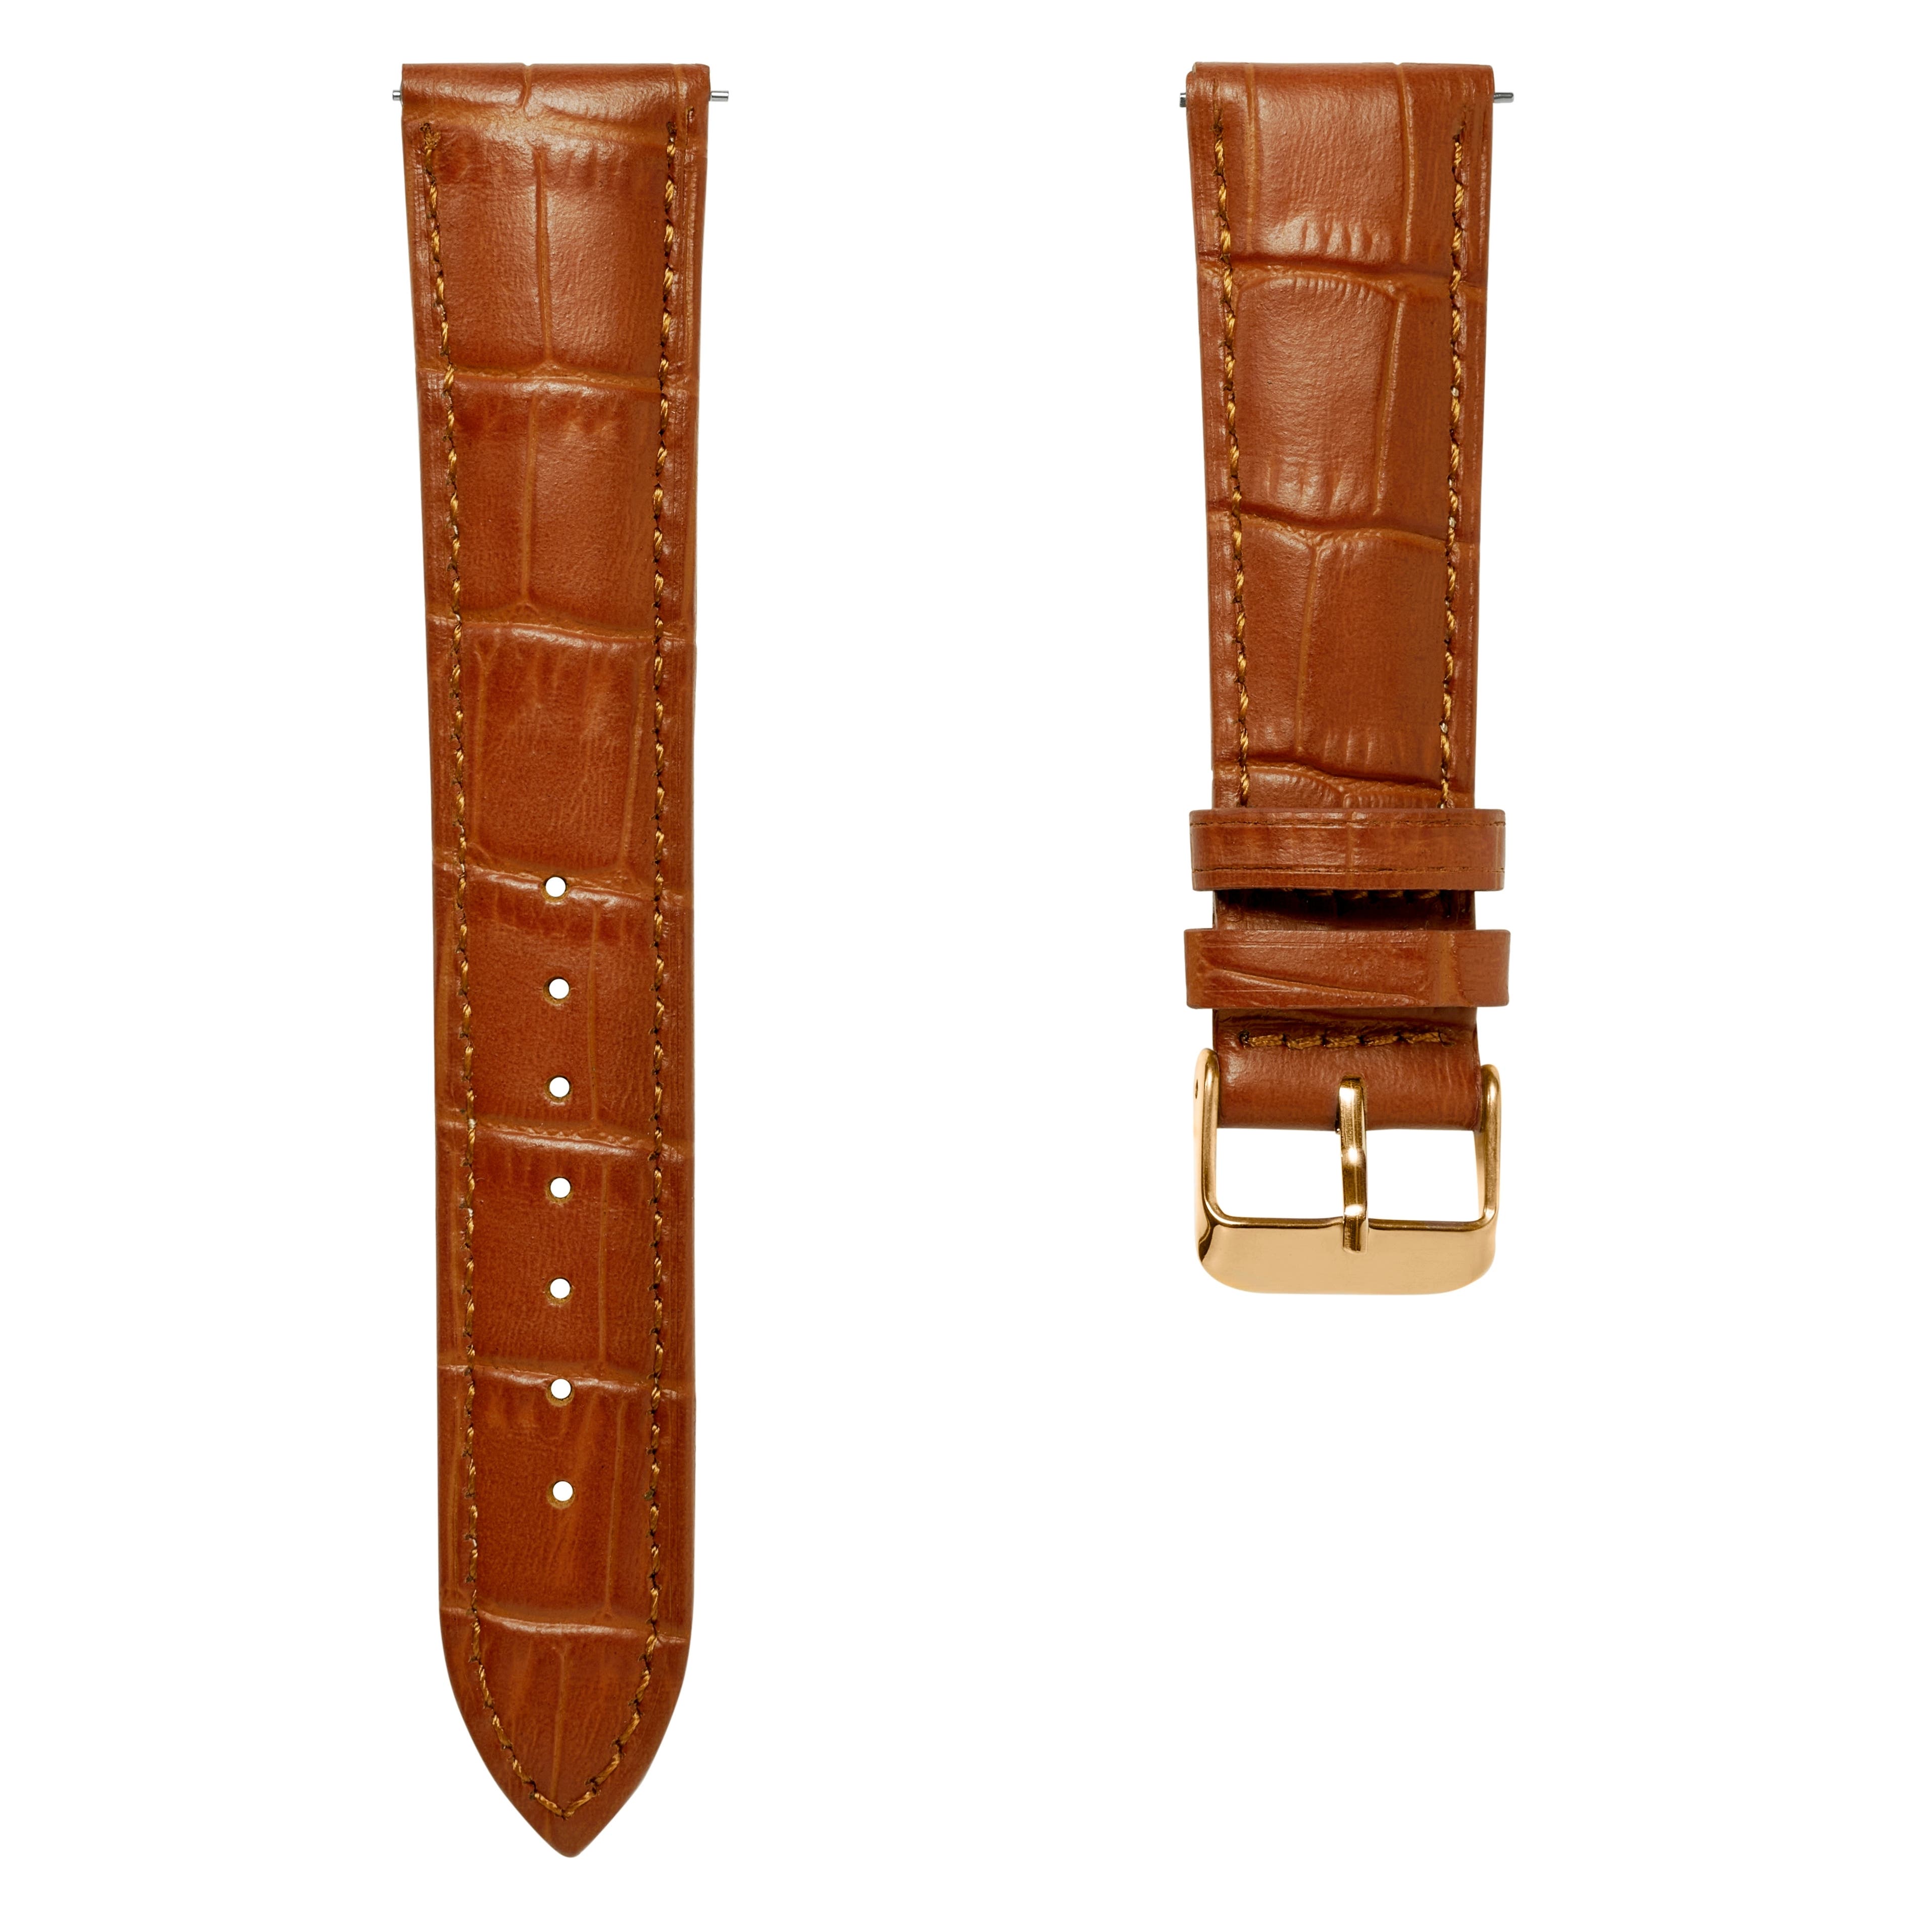 22 mm Crocodile-Embossed Tan Leather Watch Strap with Rose Gold-Tone Buckle – Quick Release